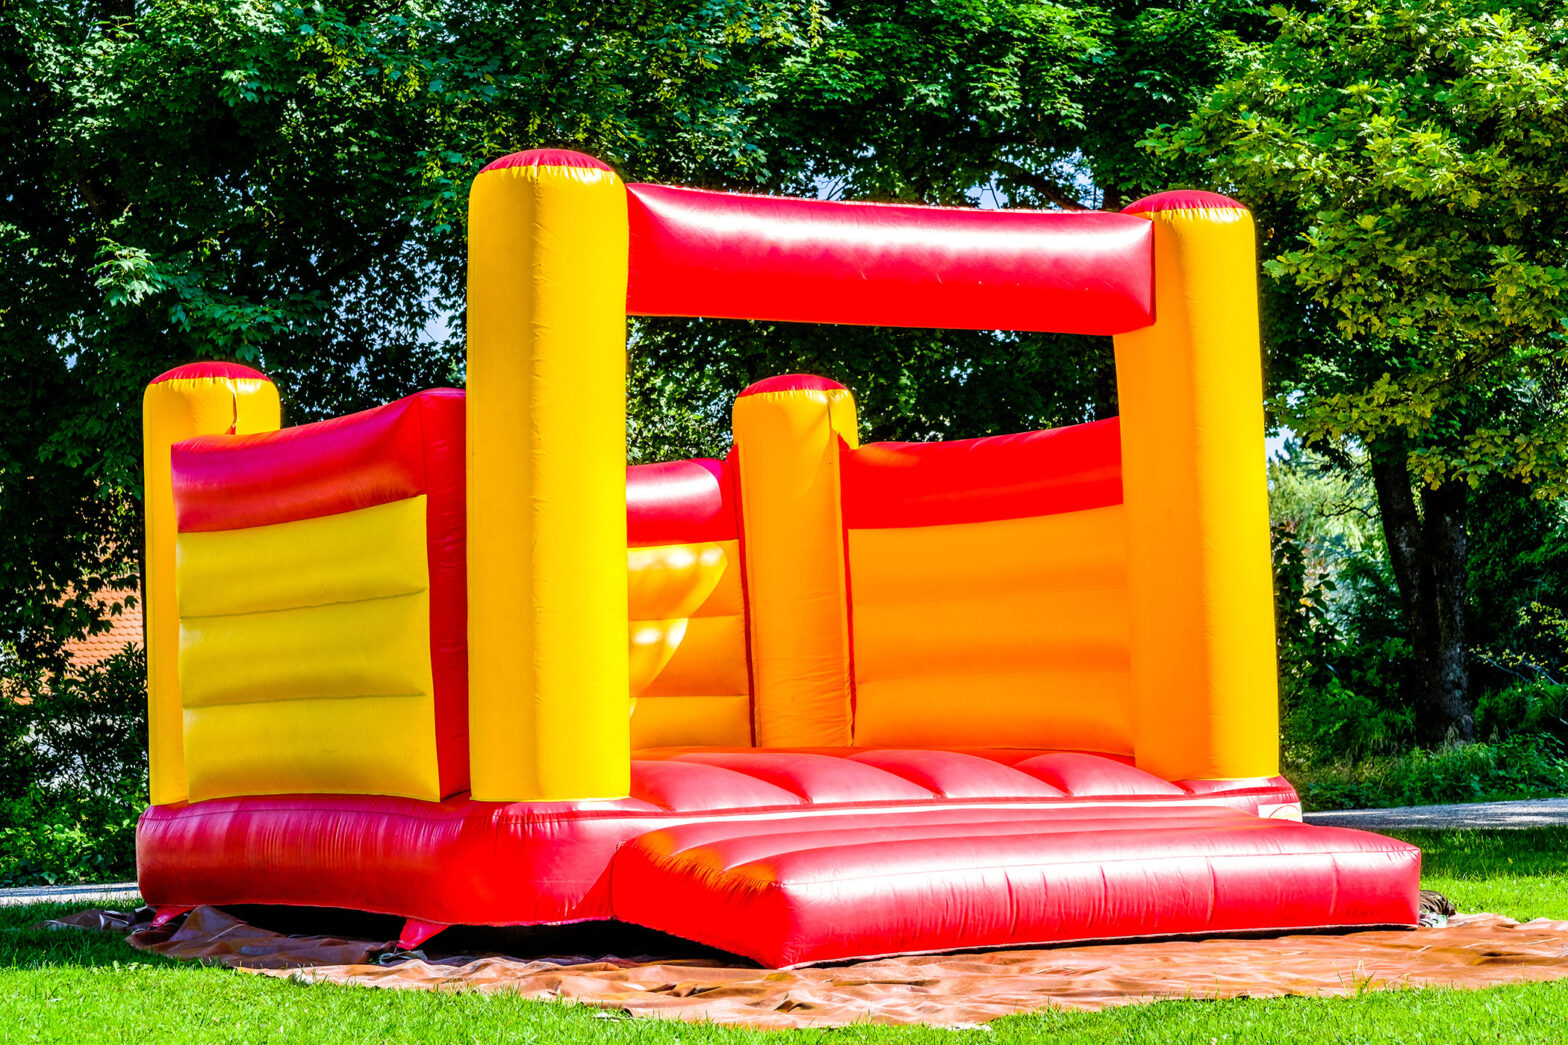 Yellow and red bounce house